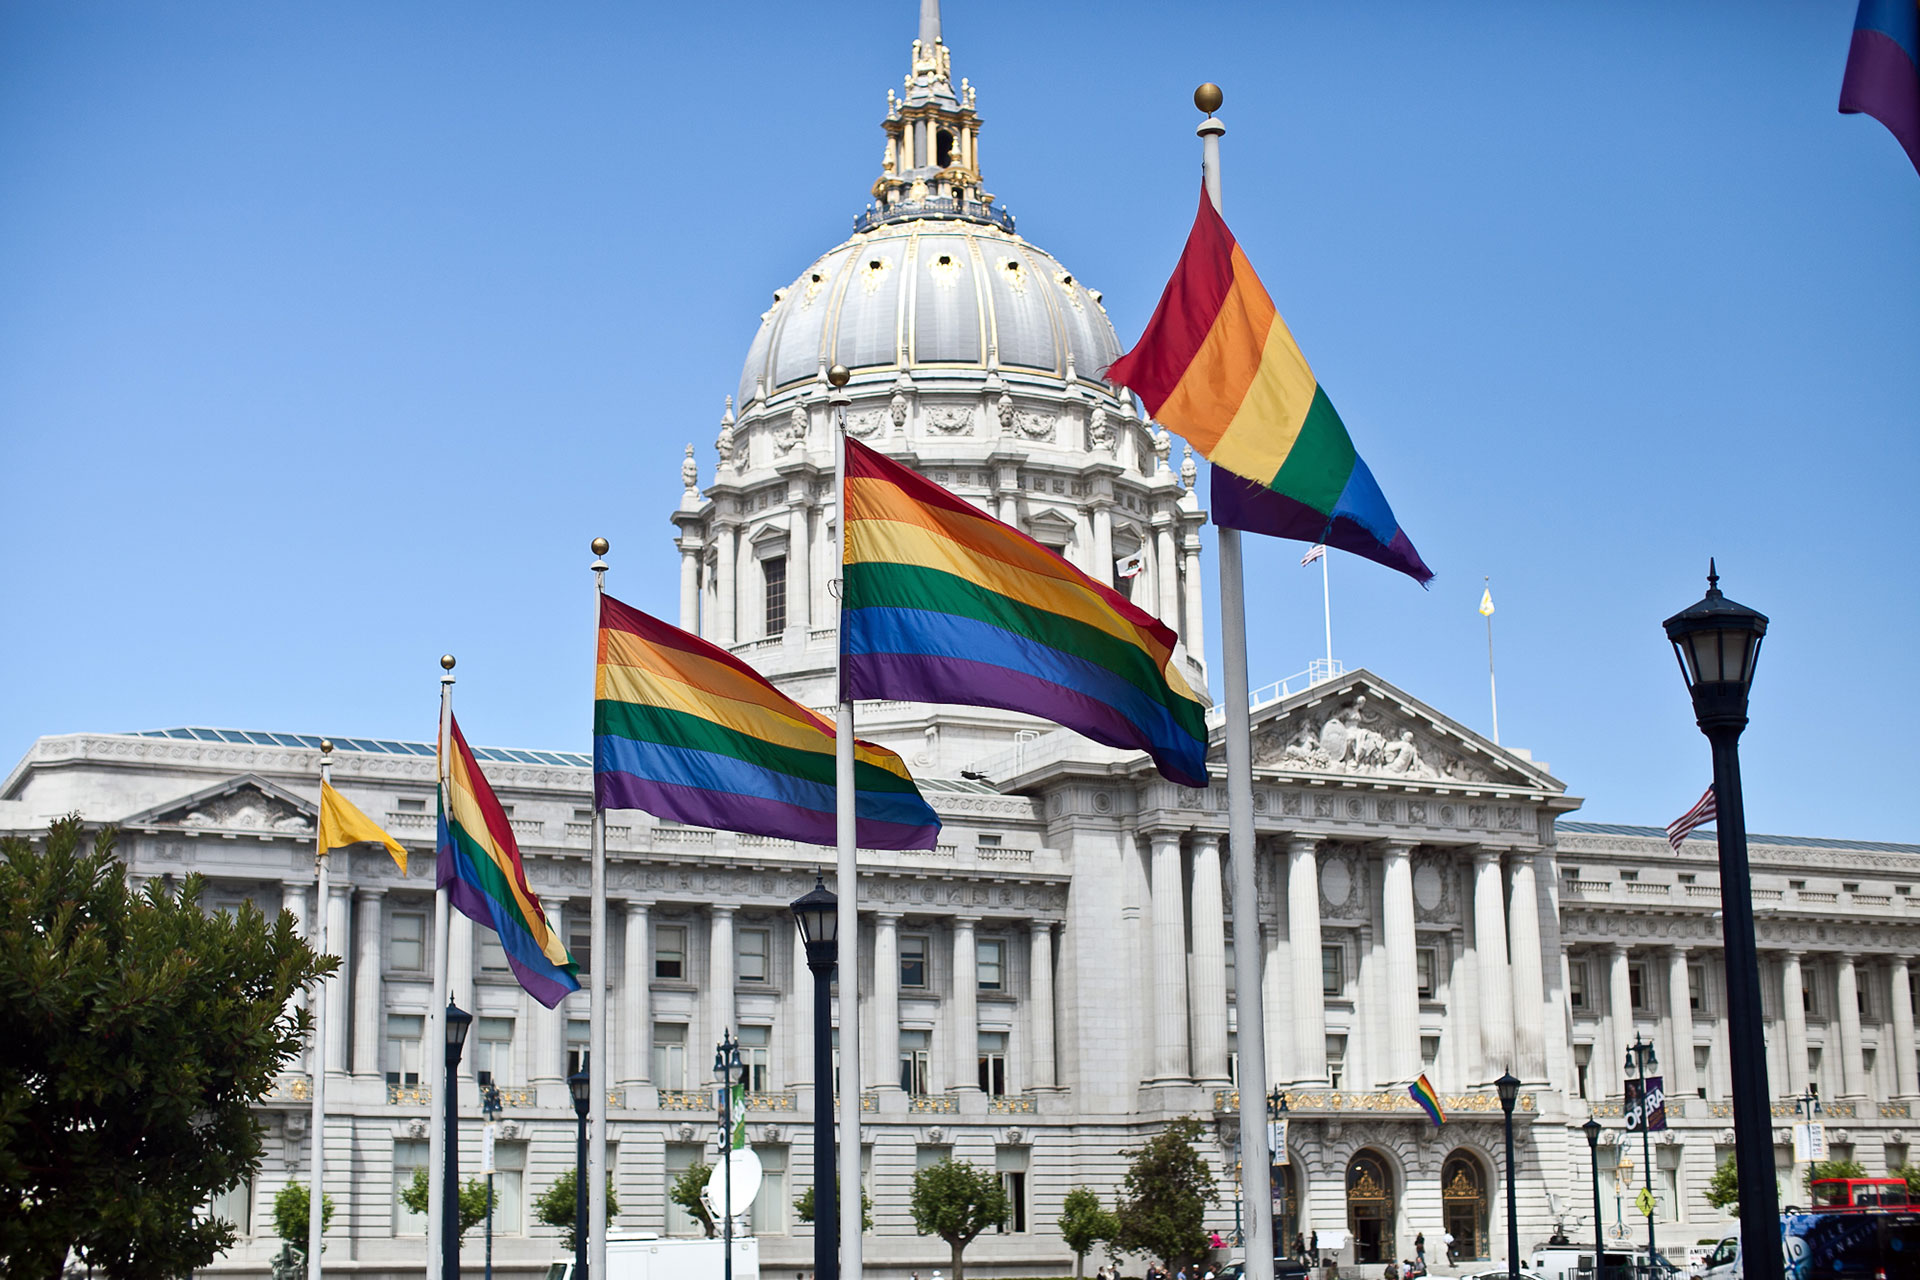 Rainbow flags fly in front of an impressive white stone building with a dome.